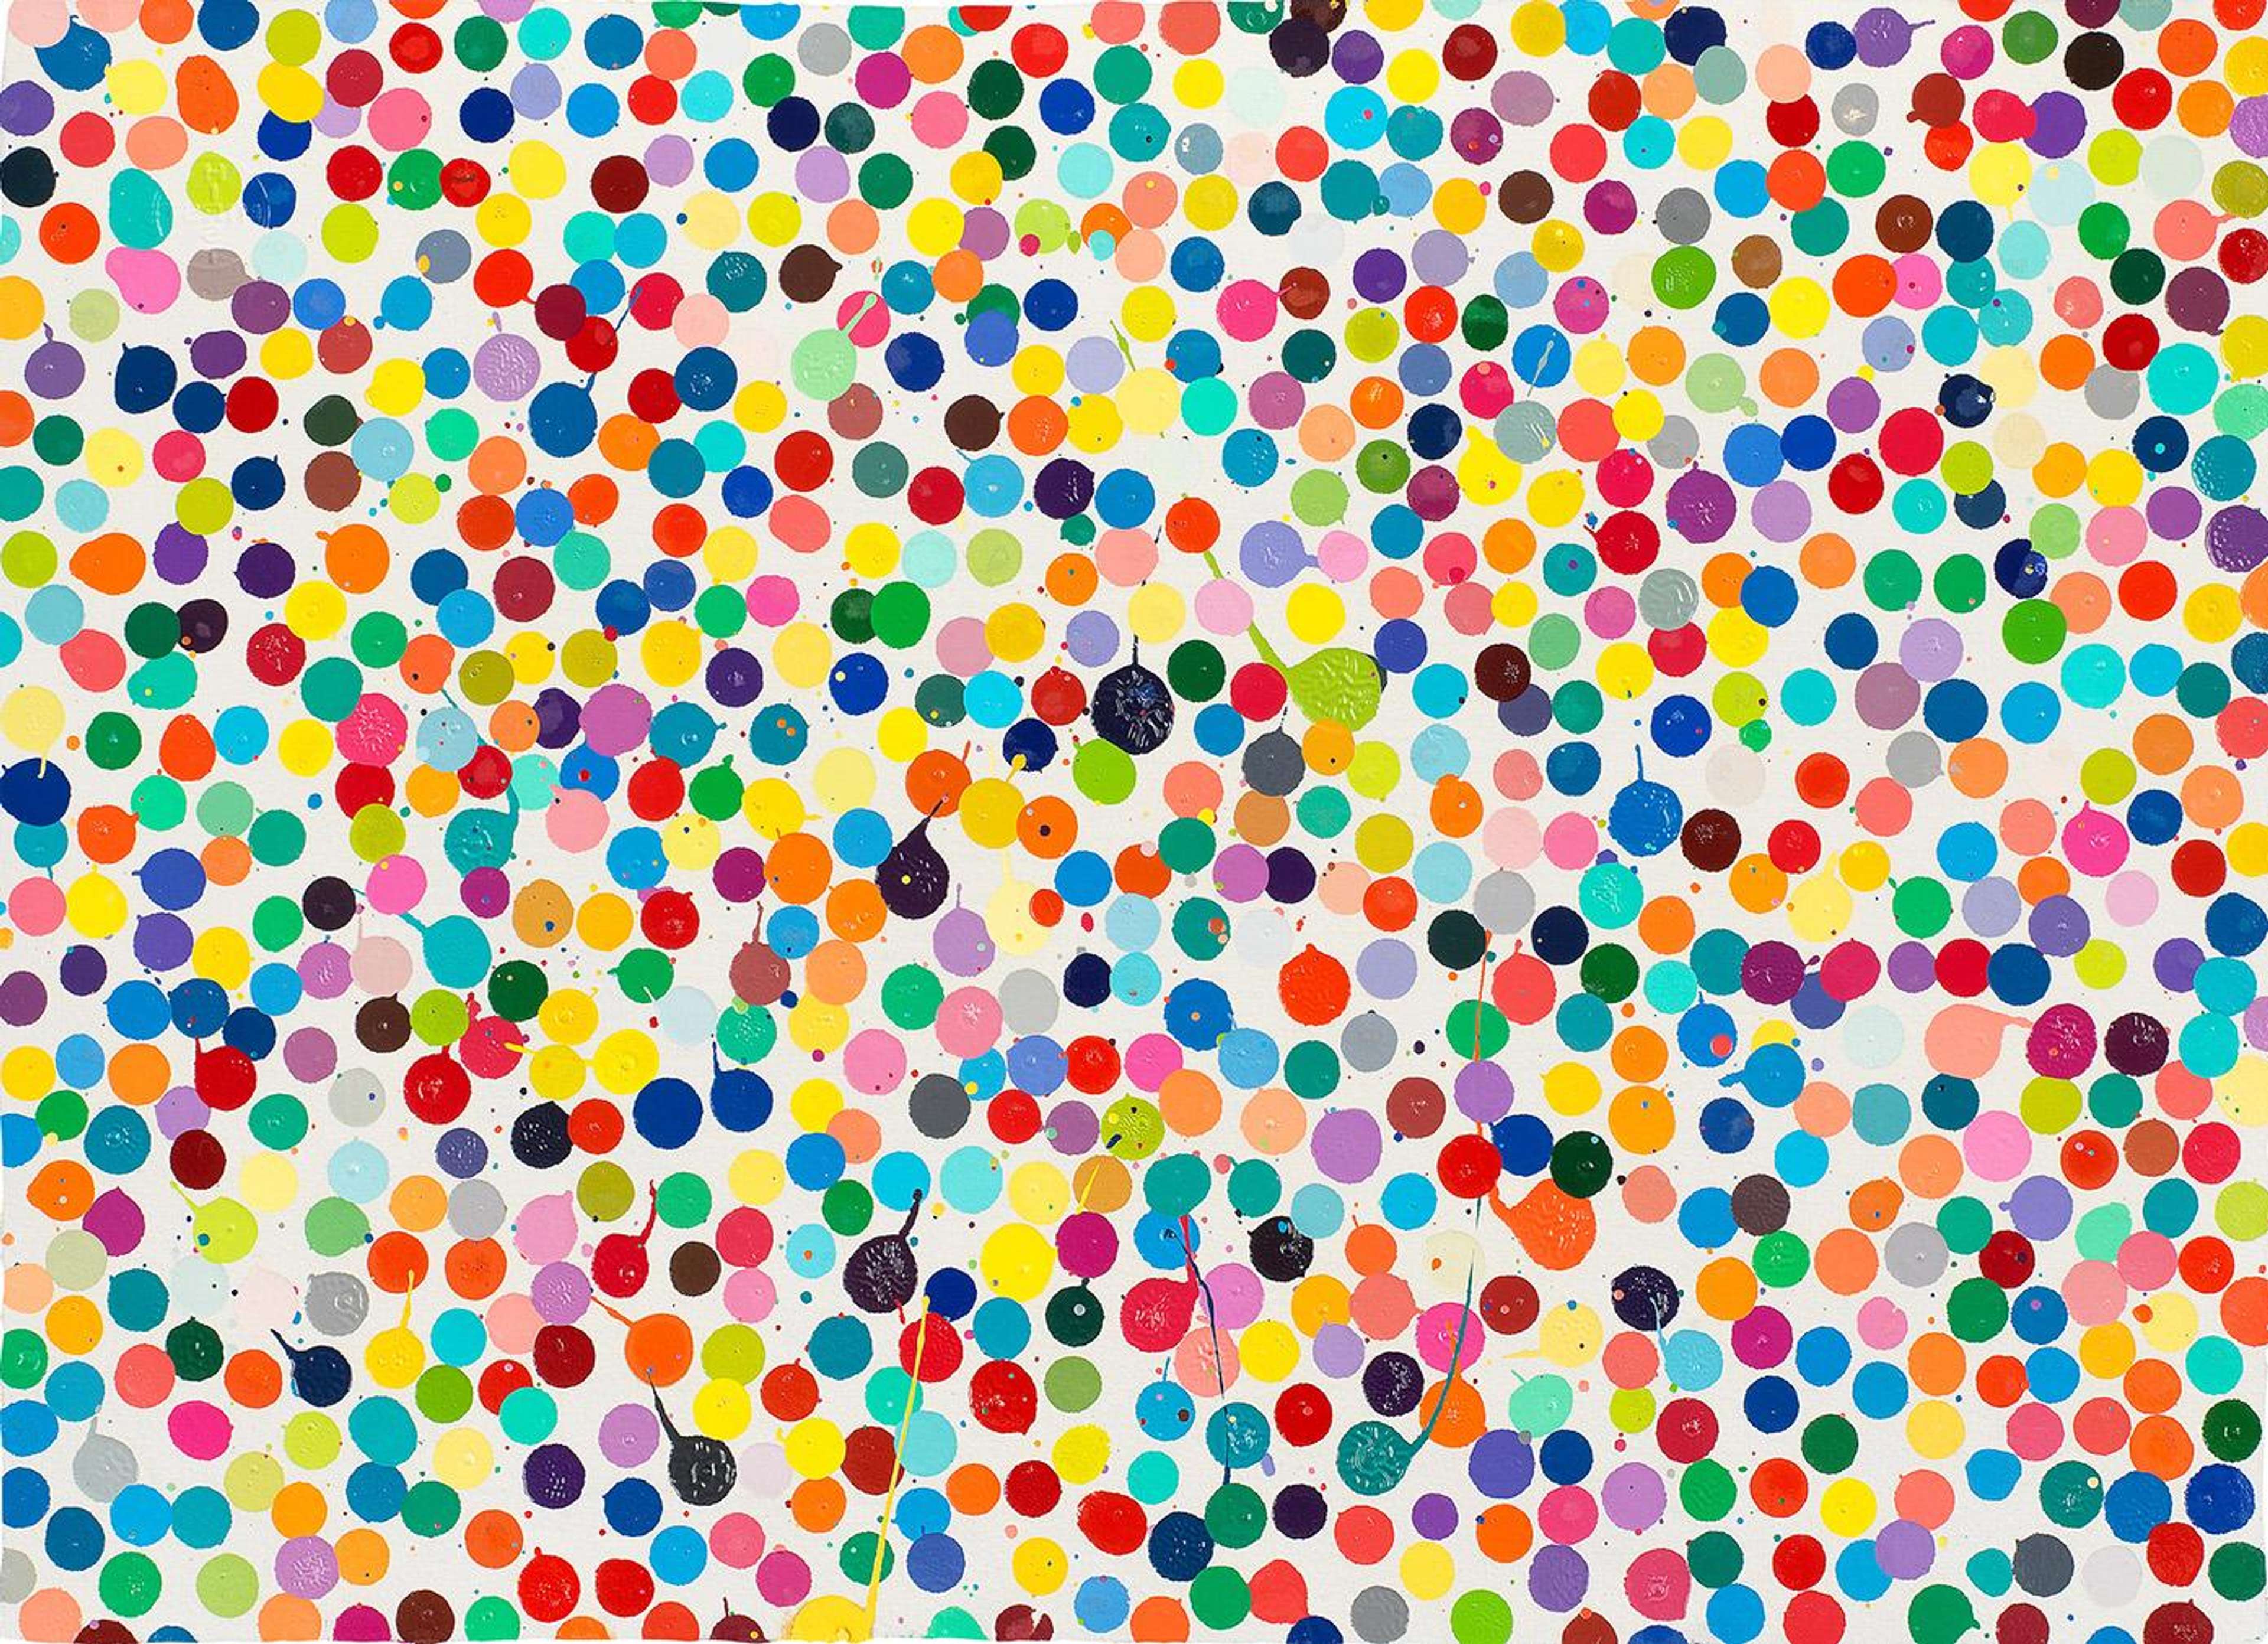 Multicoloured dots against a white paper background.